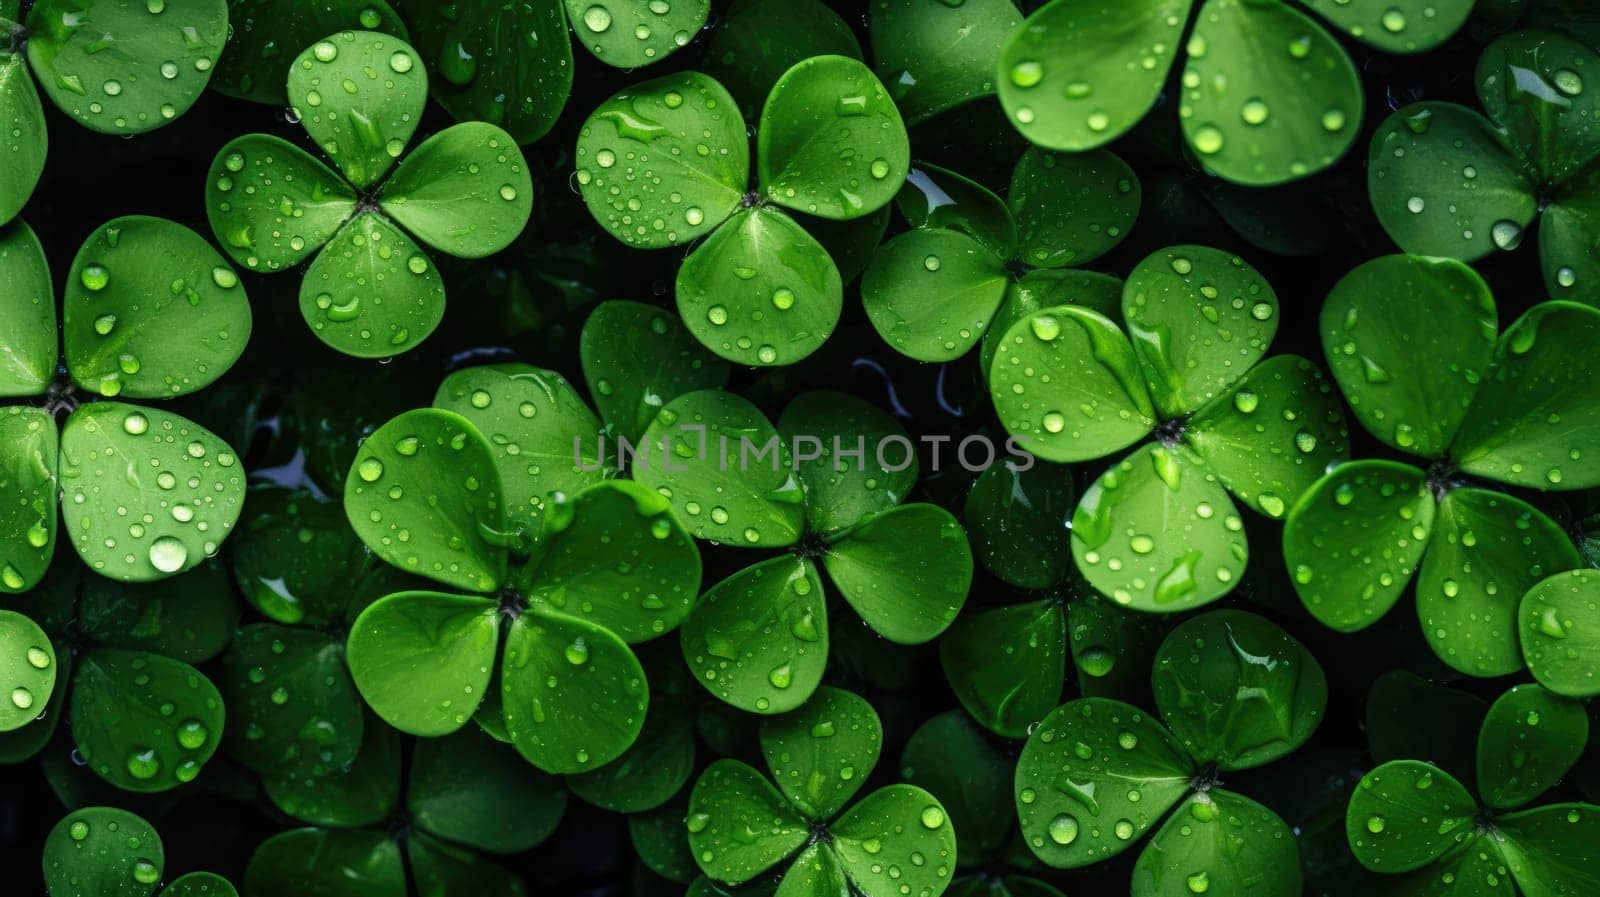 Vibrant Field of Lush Green Four-Leaf Clovers Glistening in the Sunlight by JuliaDorian